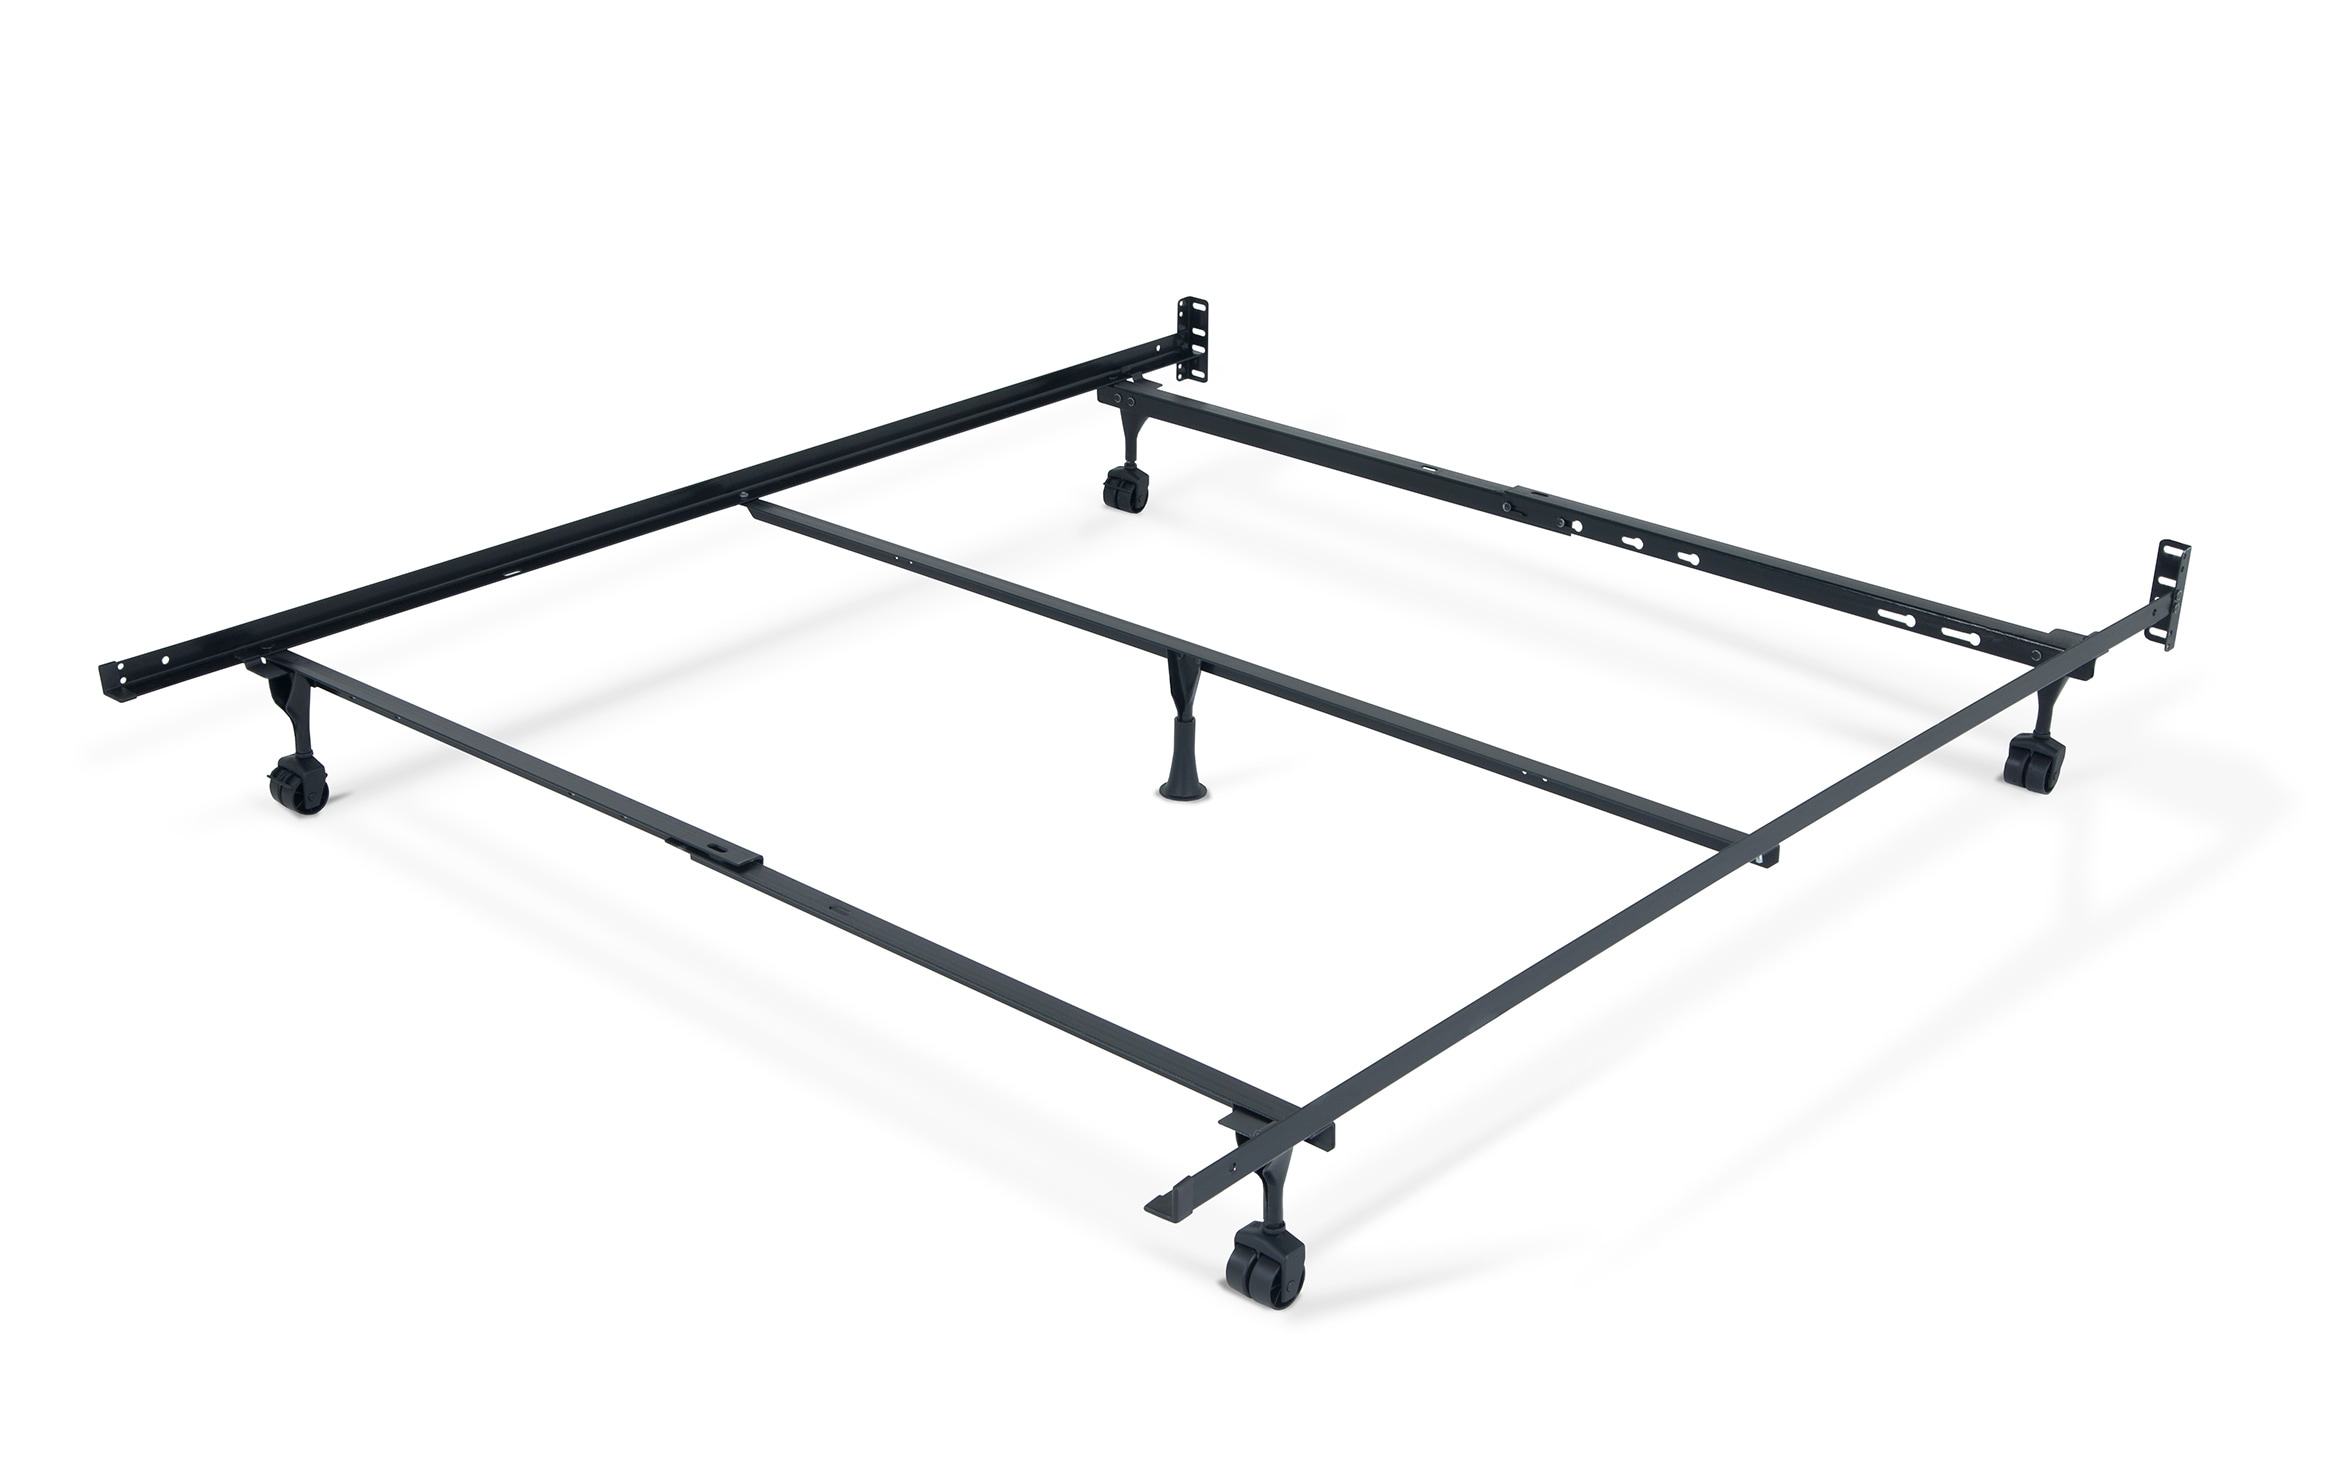 Queen King California Bed Frame, California King Metal Bed Frame